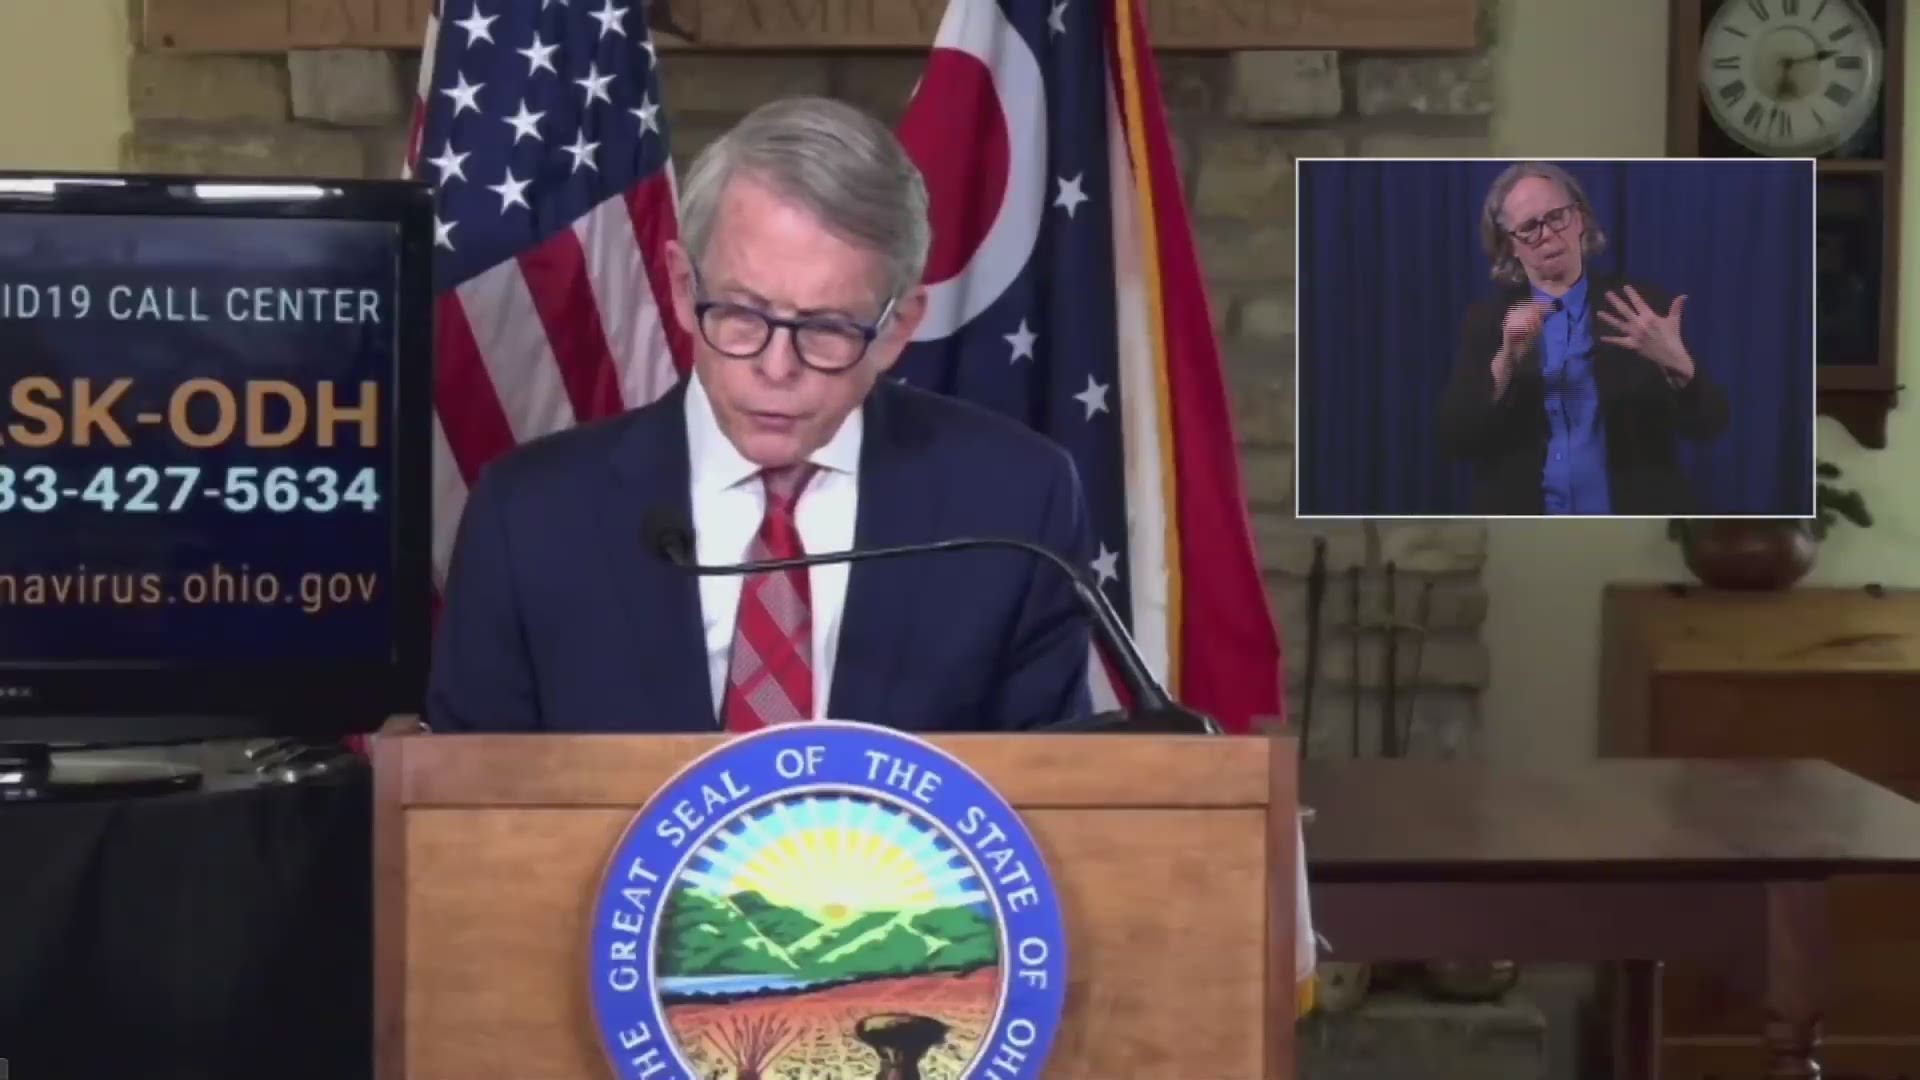 Ohio Governor Mike DeWine said on Thursday that Cleveland Browns home games will be exempt from the state's extended curfew.